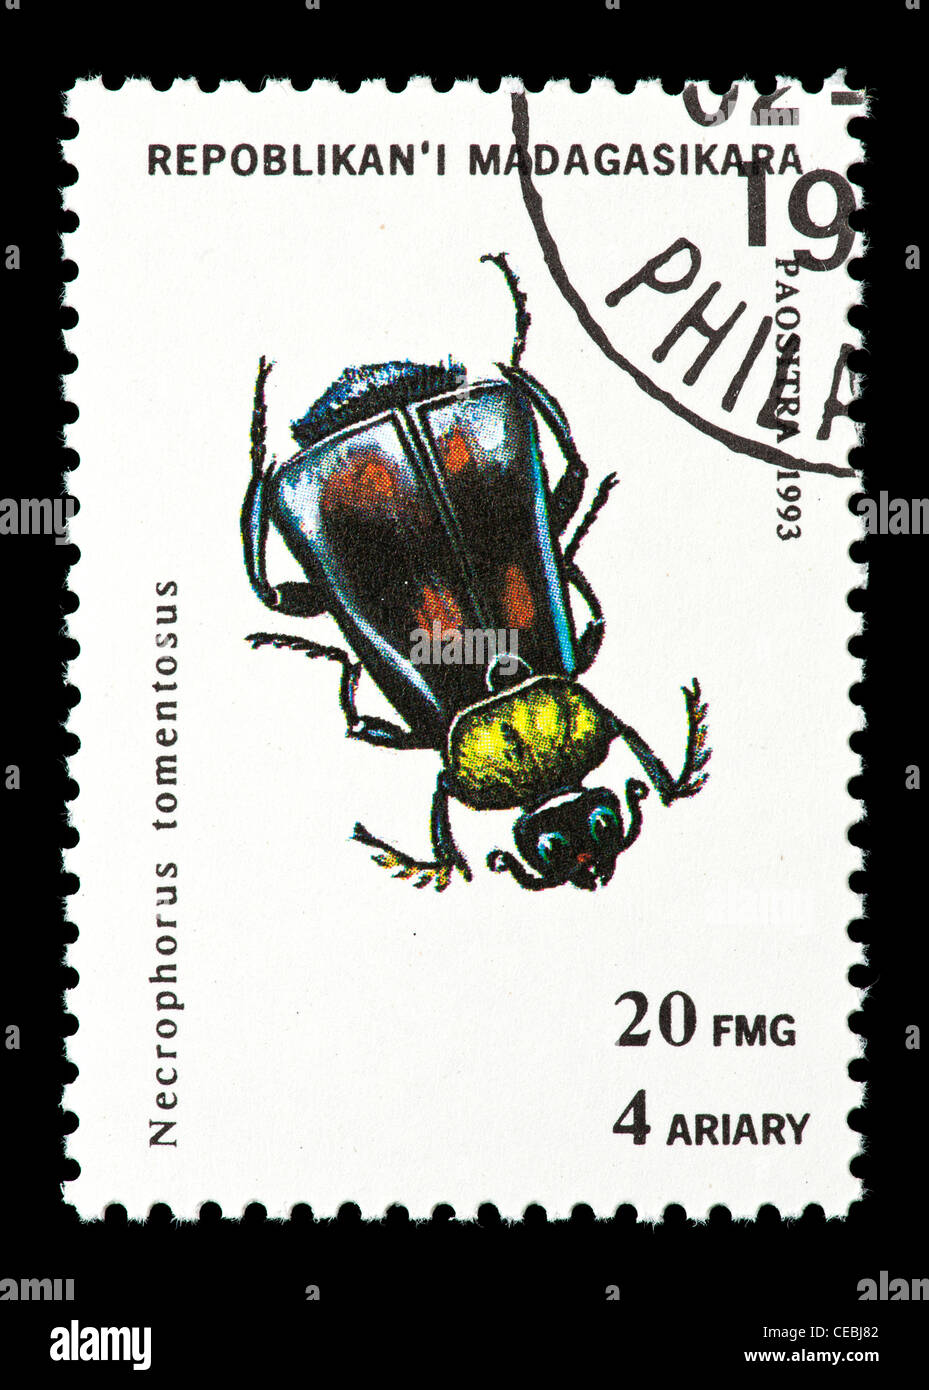 Postage stamp from the Malagasy Republic (Madagascar) depicting a beetle (Necrophorus tomentosus) Stock Photo